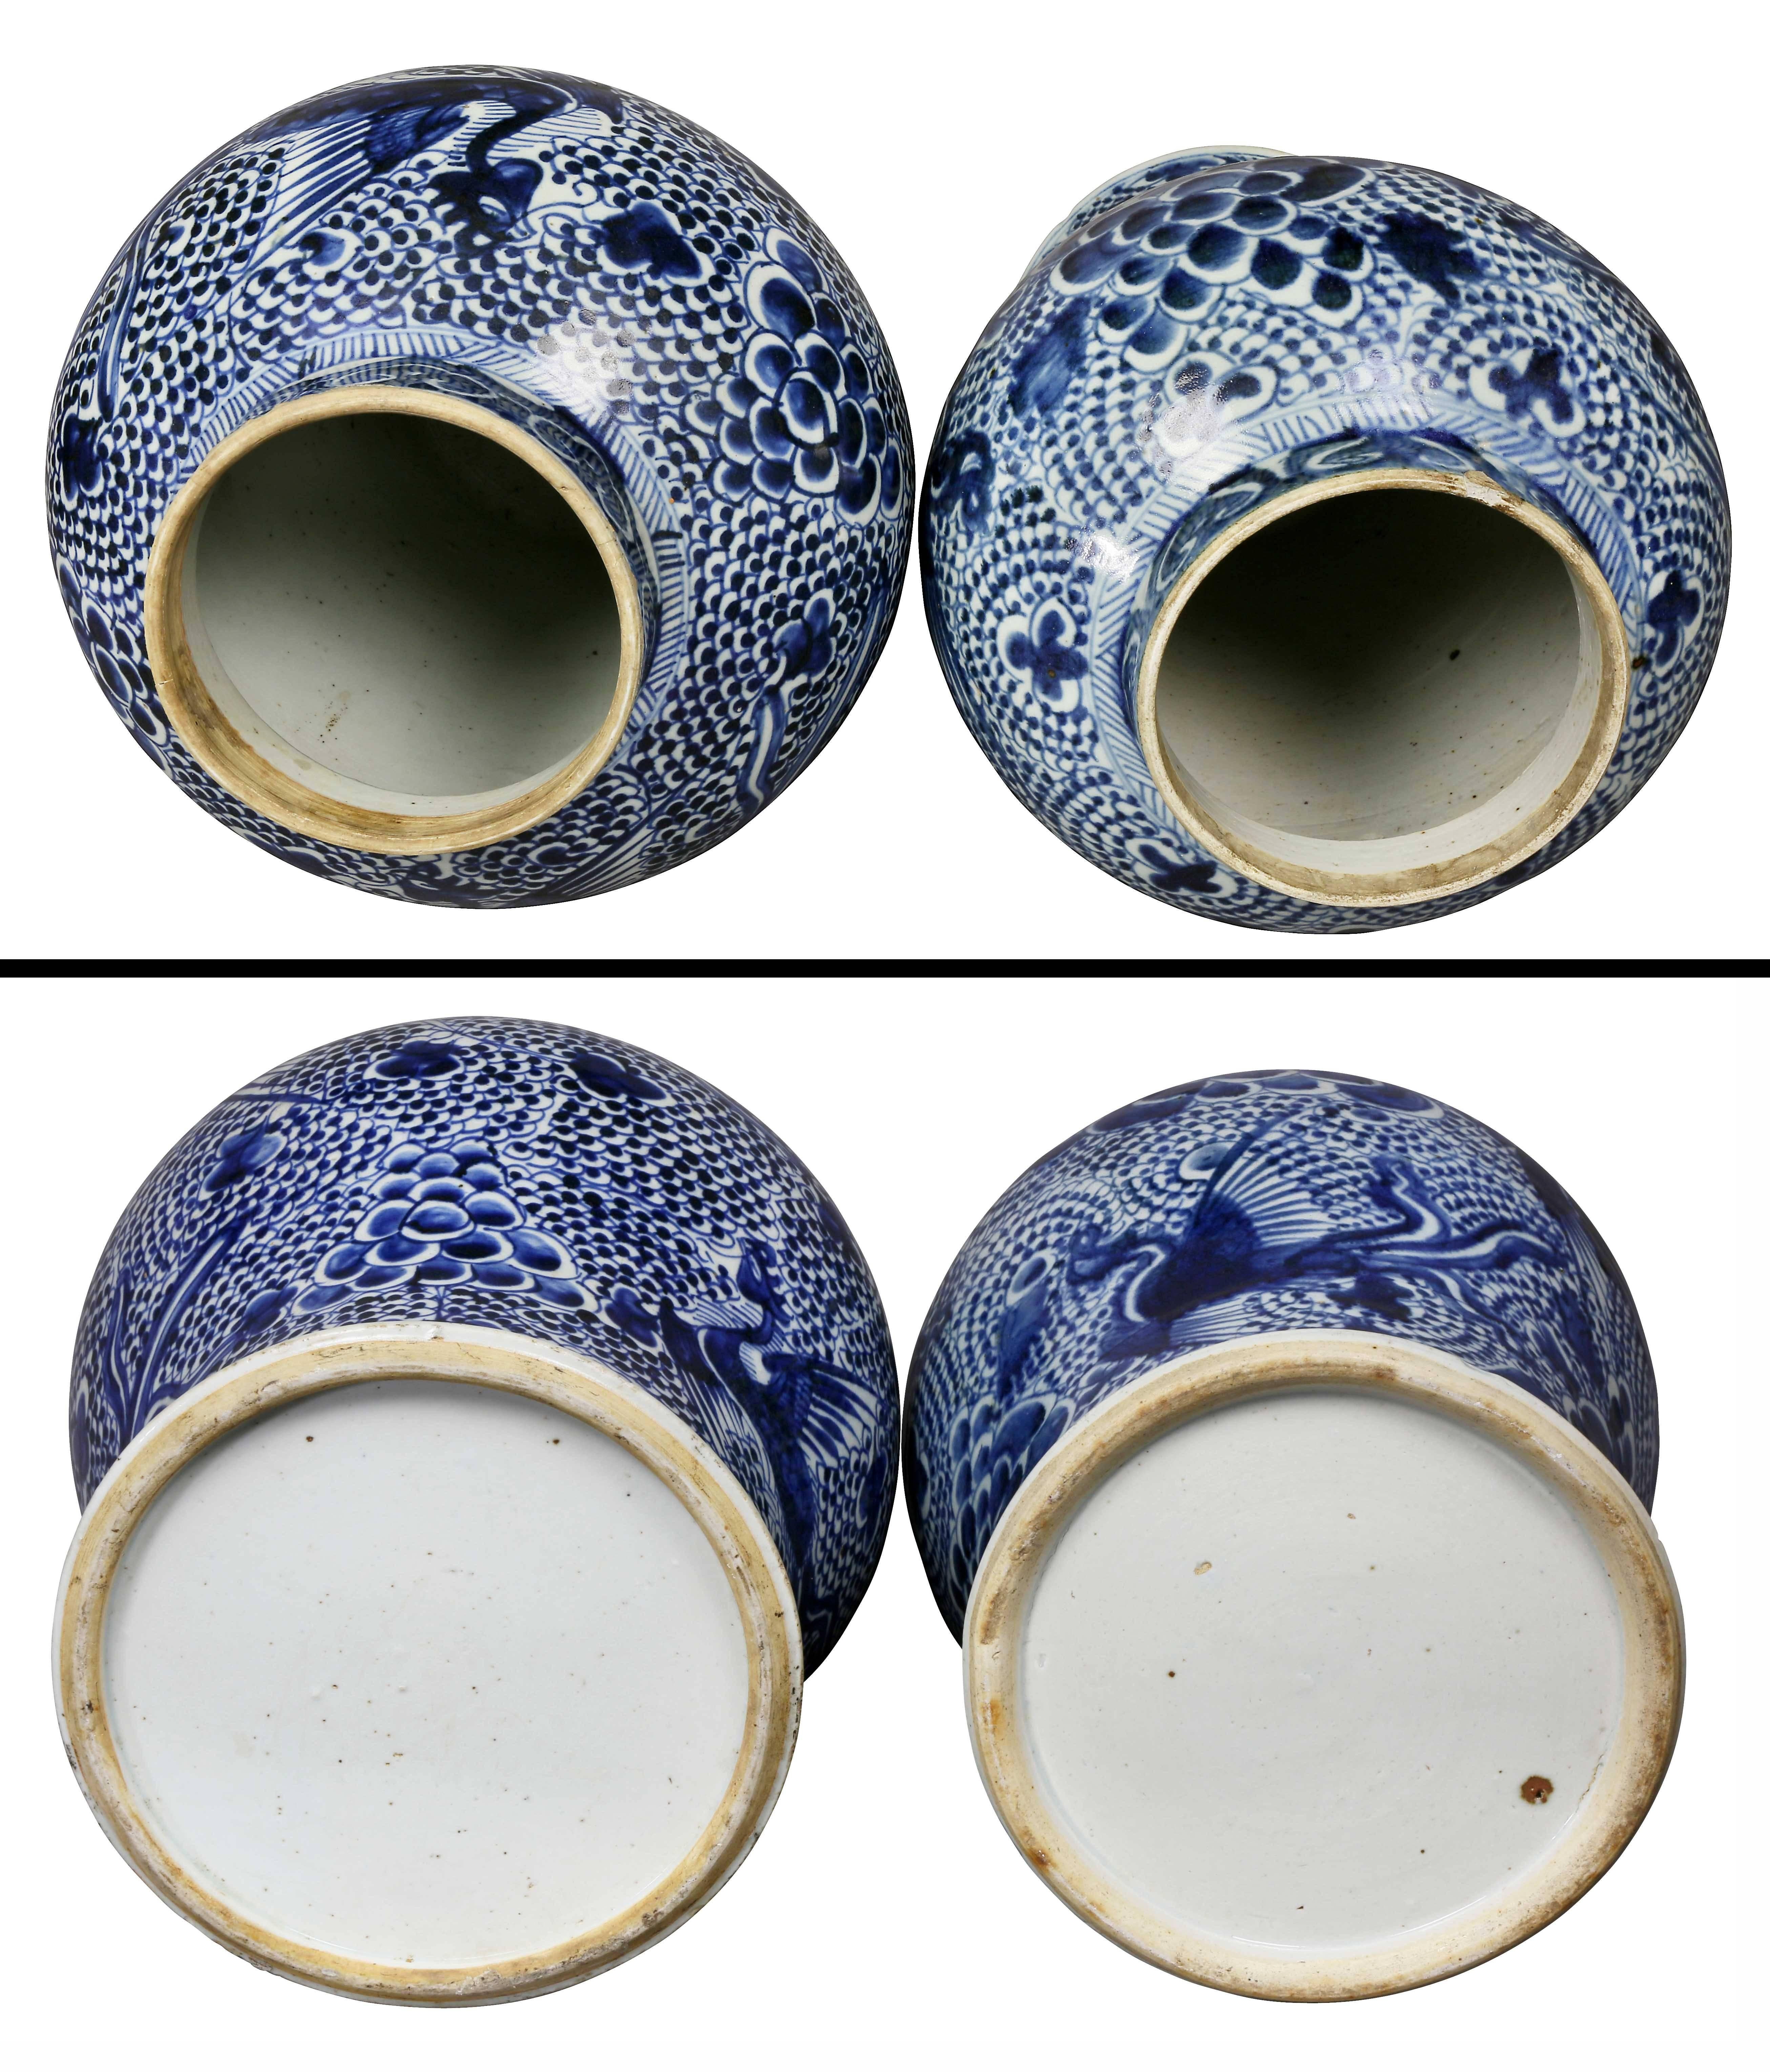 Matched Pair of Chinese Blue and White Covered Jars 5